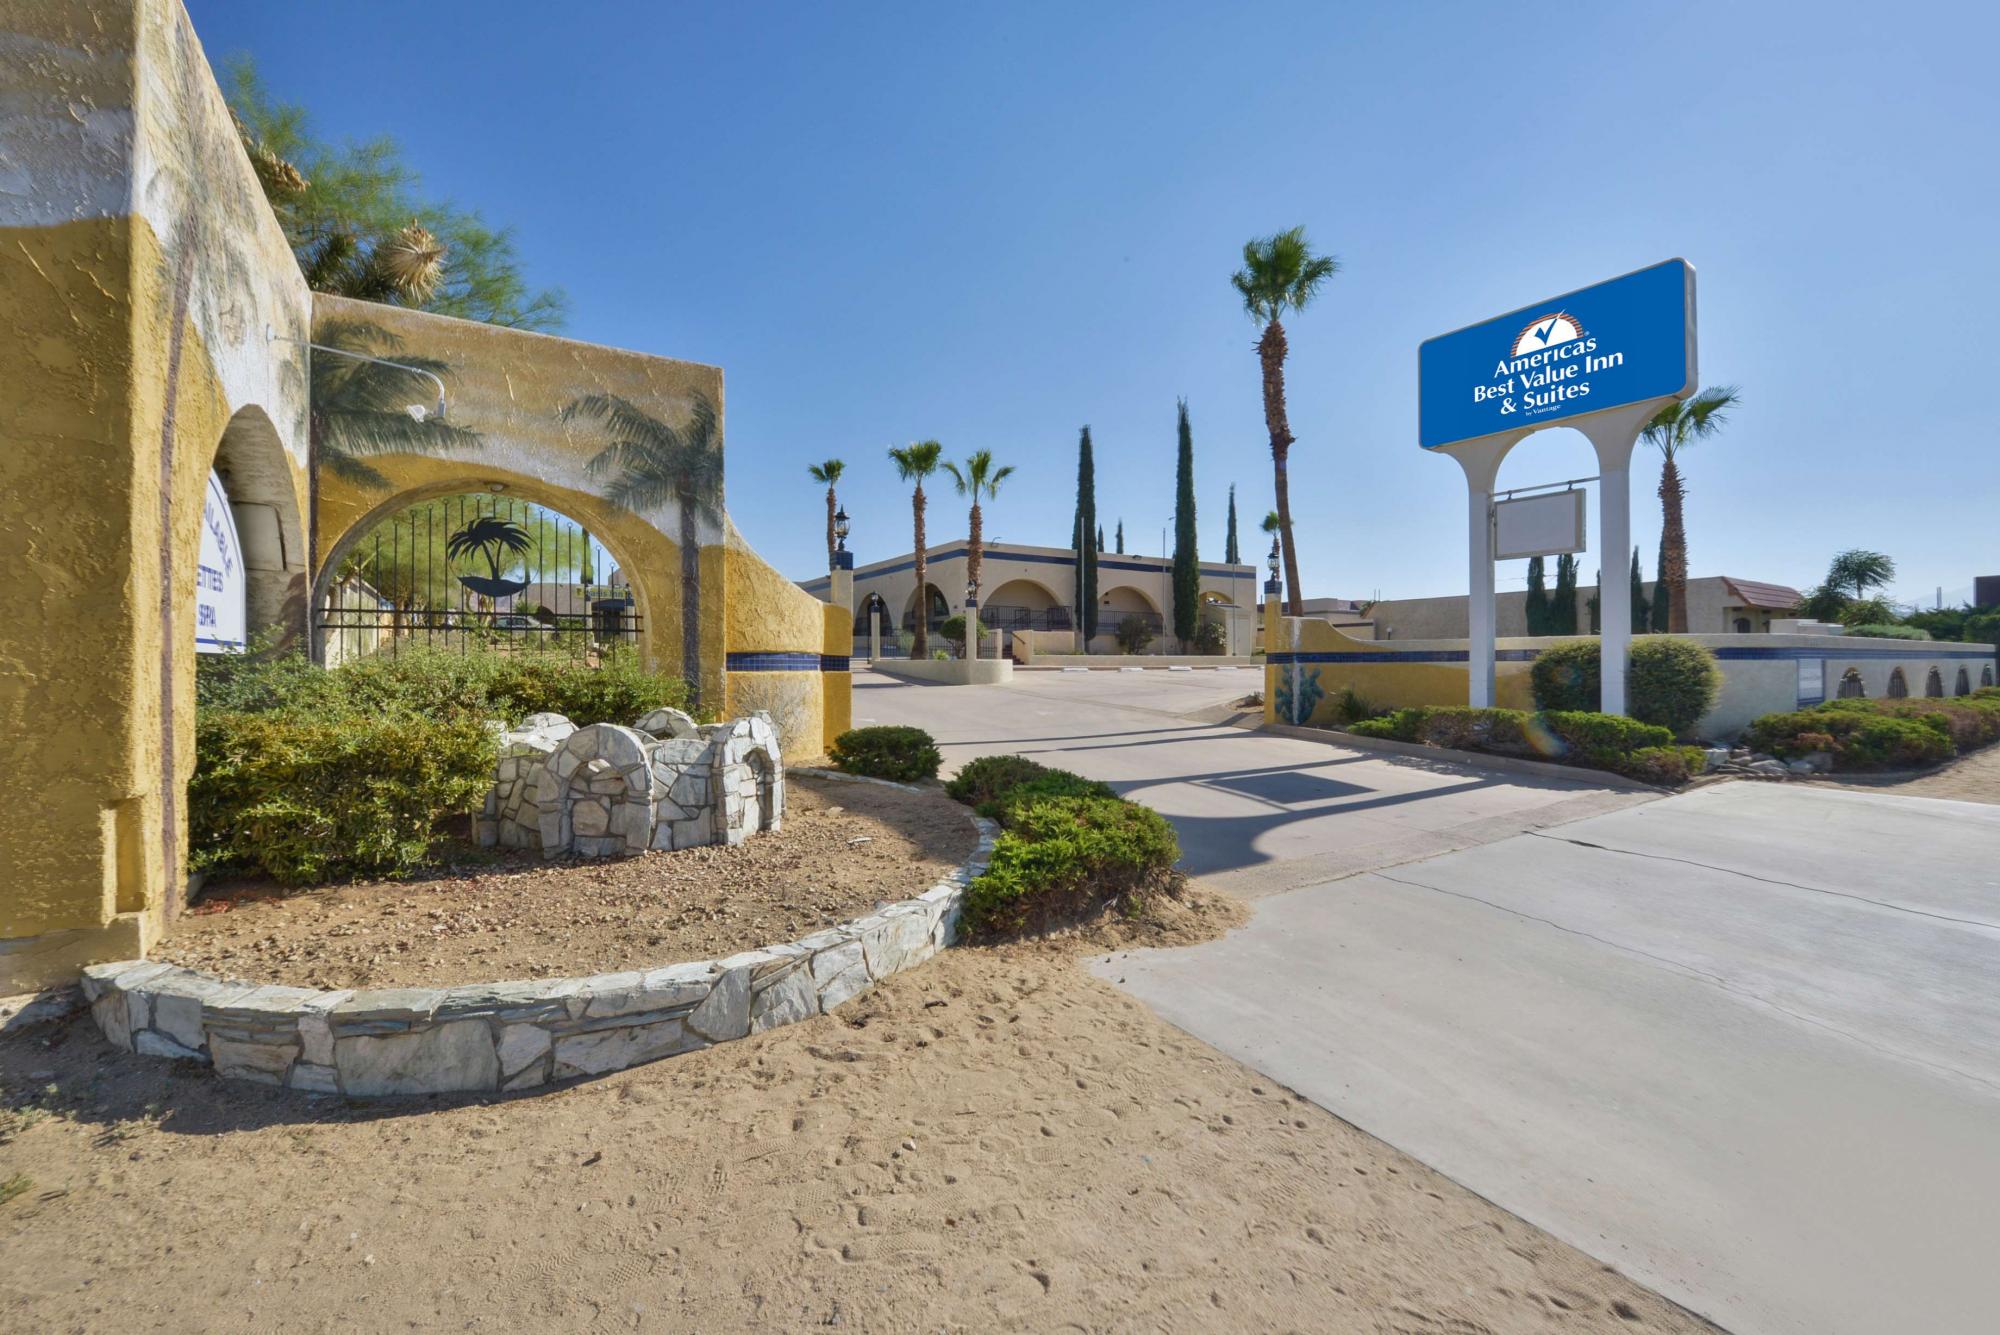 Street view of hotel exterior with sign and palm trees